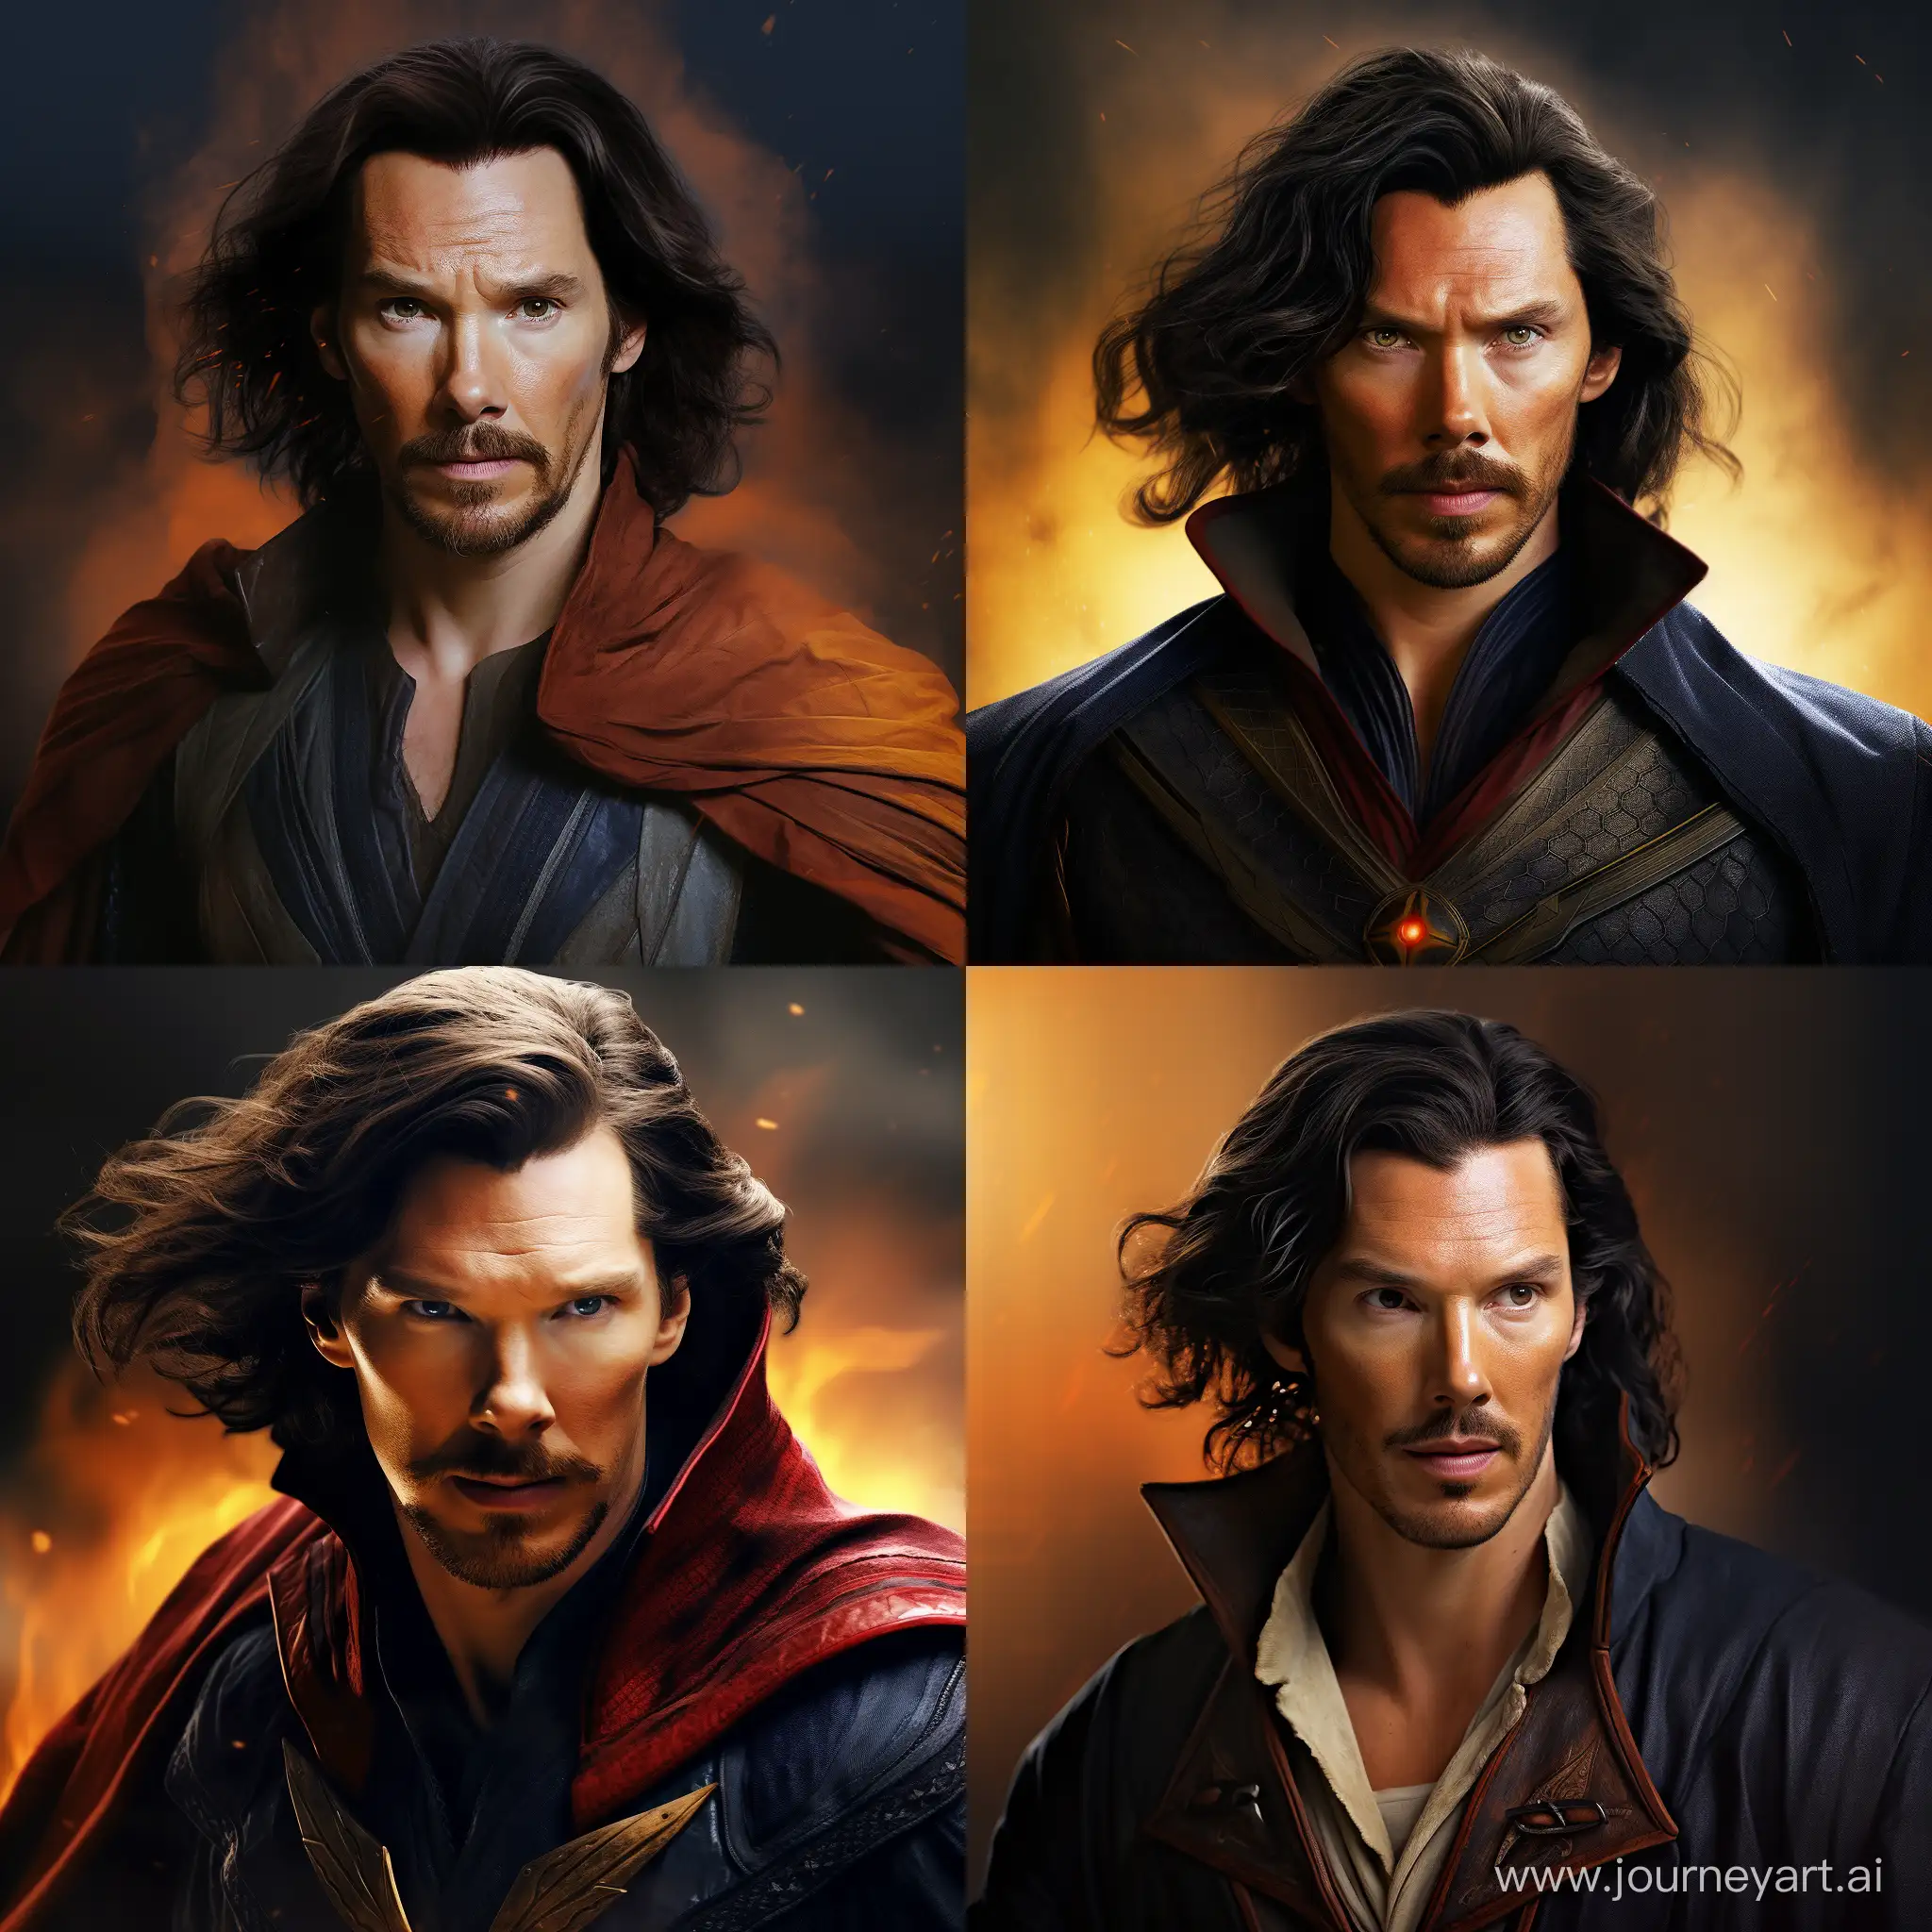 Create a realistic photo of Benedict Cumberbatch as Doctor Strange with long hair